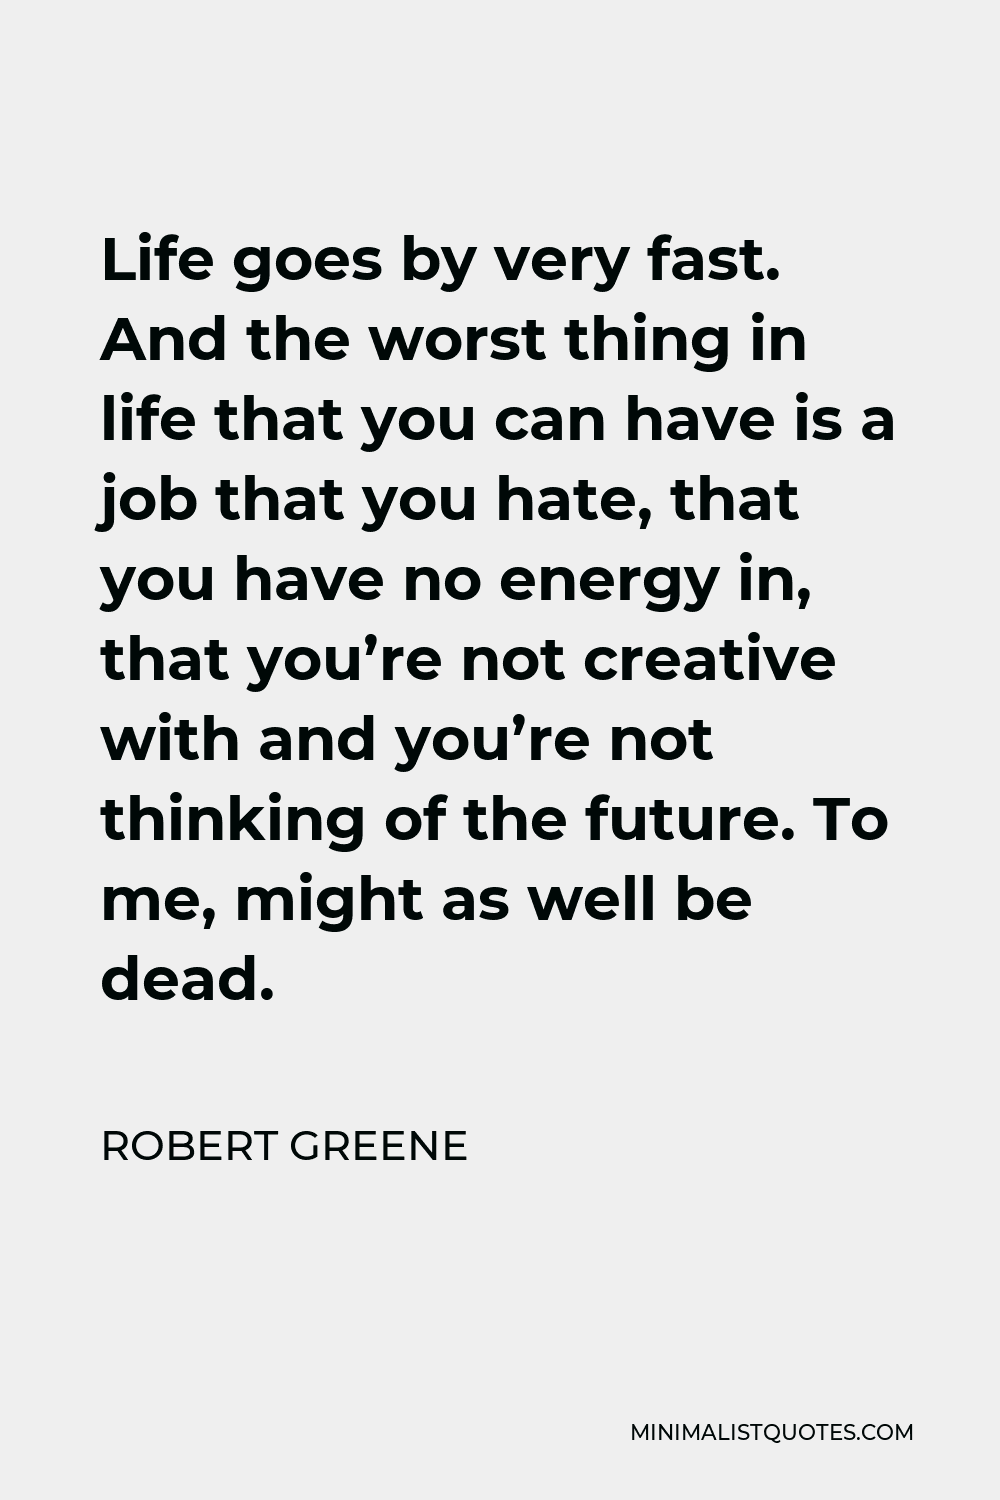 Robert Greene Quote - Life goes by very fast. And the worst thing in life that you can have is a job that you hate, that you have no energy in, that you’re not creative with and you’re not thinking of the future. To me, might as well be dead.